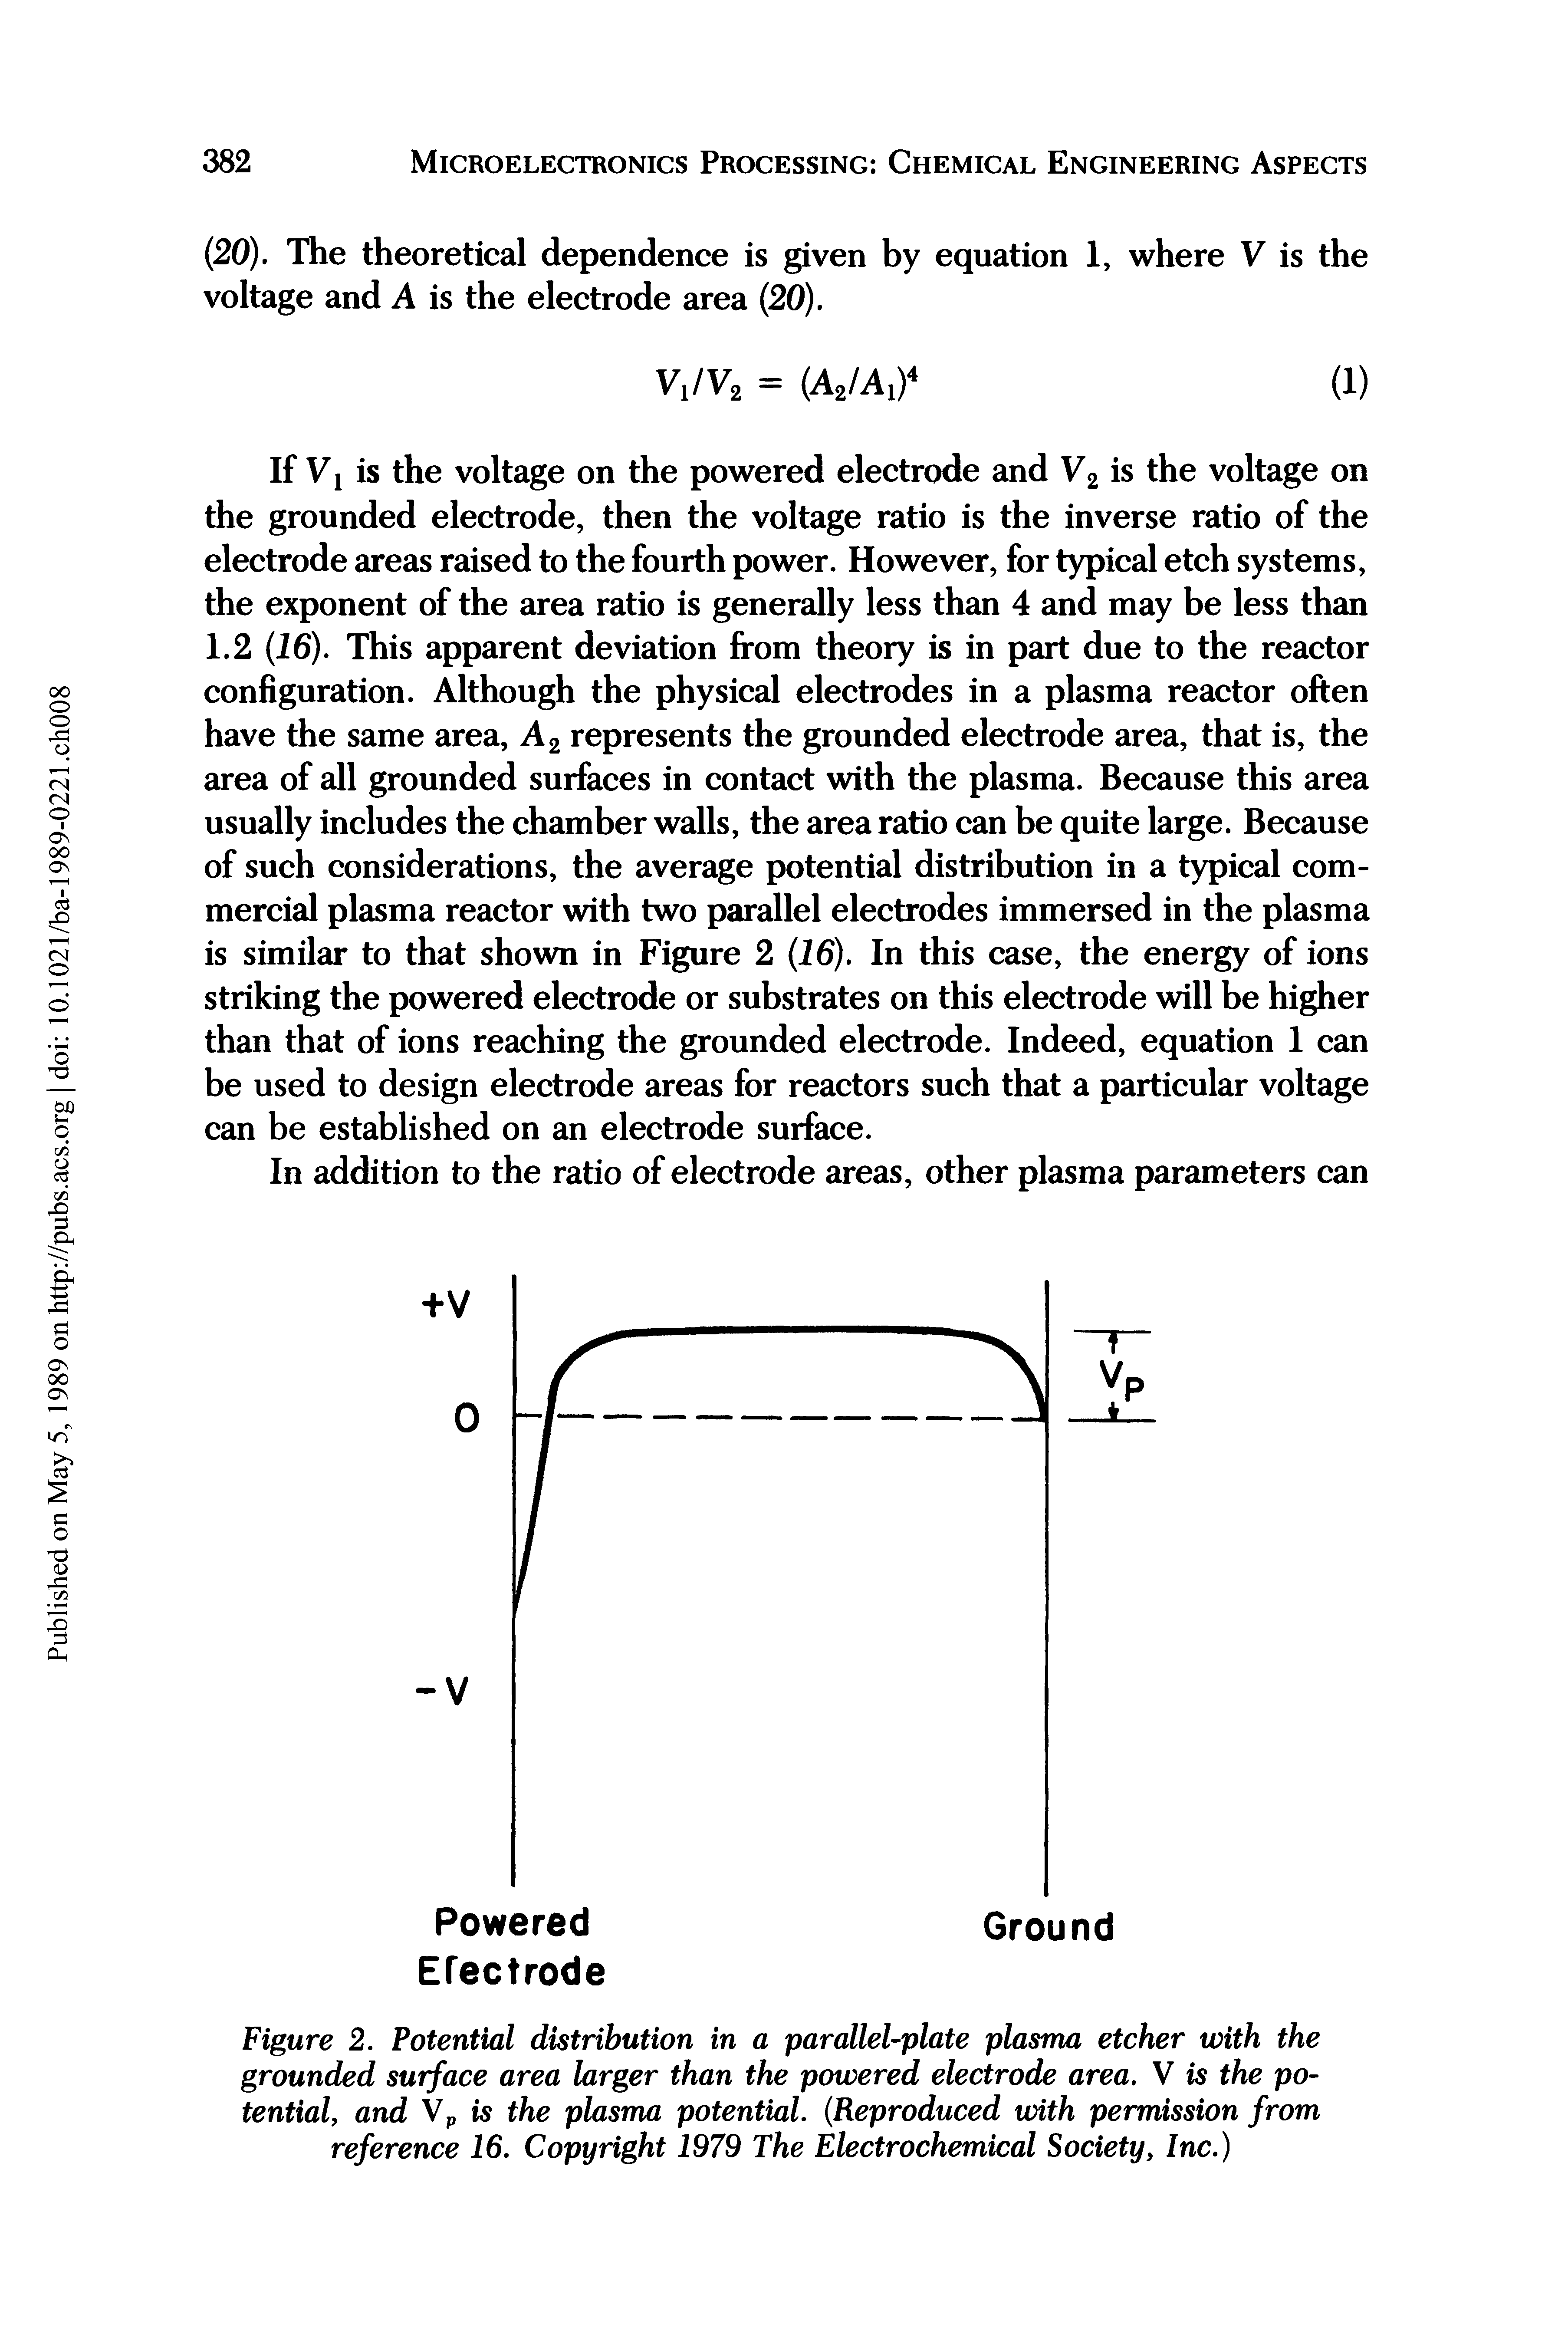 Figure 2. Potential distribution in a parallel-plate plasma etcher with the grounded surface area larger than the powered electrode area. V is the potential, and Vp is the plasma potential. (Reproduced with permission from reference 16. Copyright 1979 The Electrochemical Society, Inc.)...